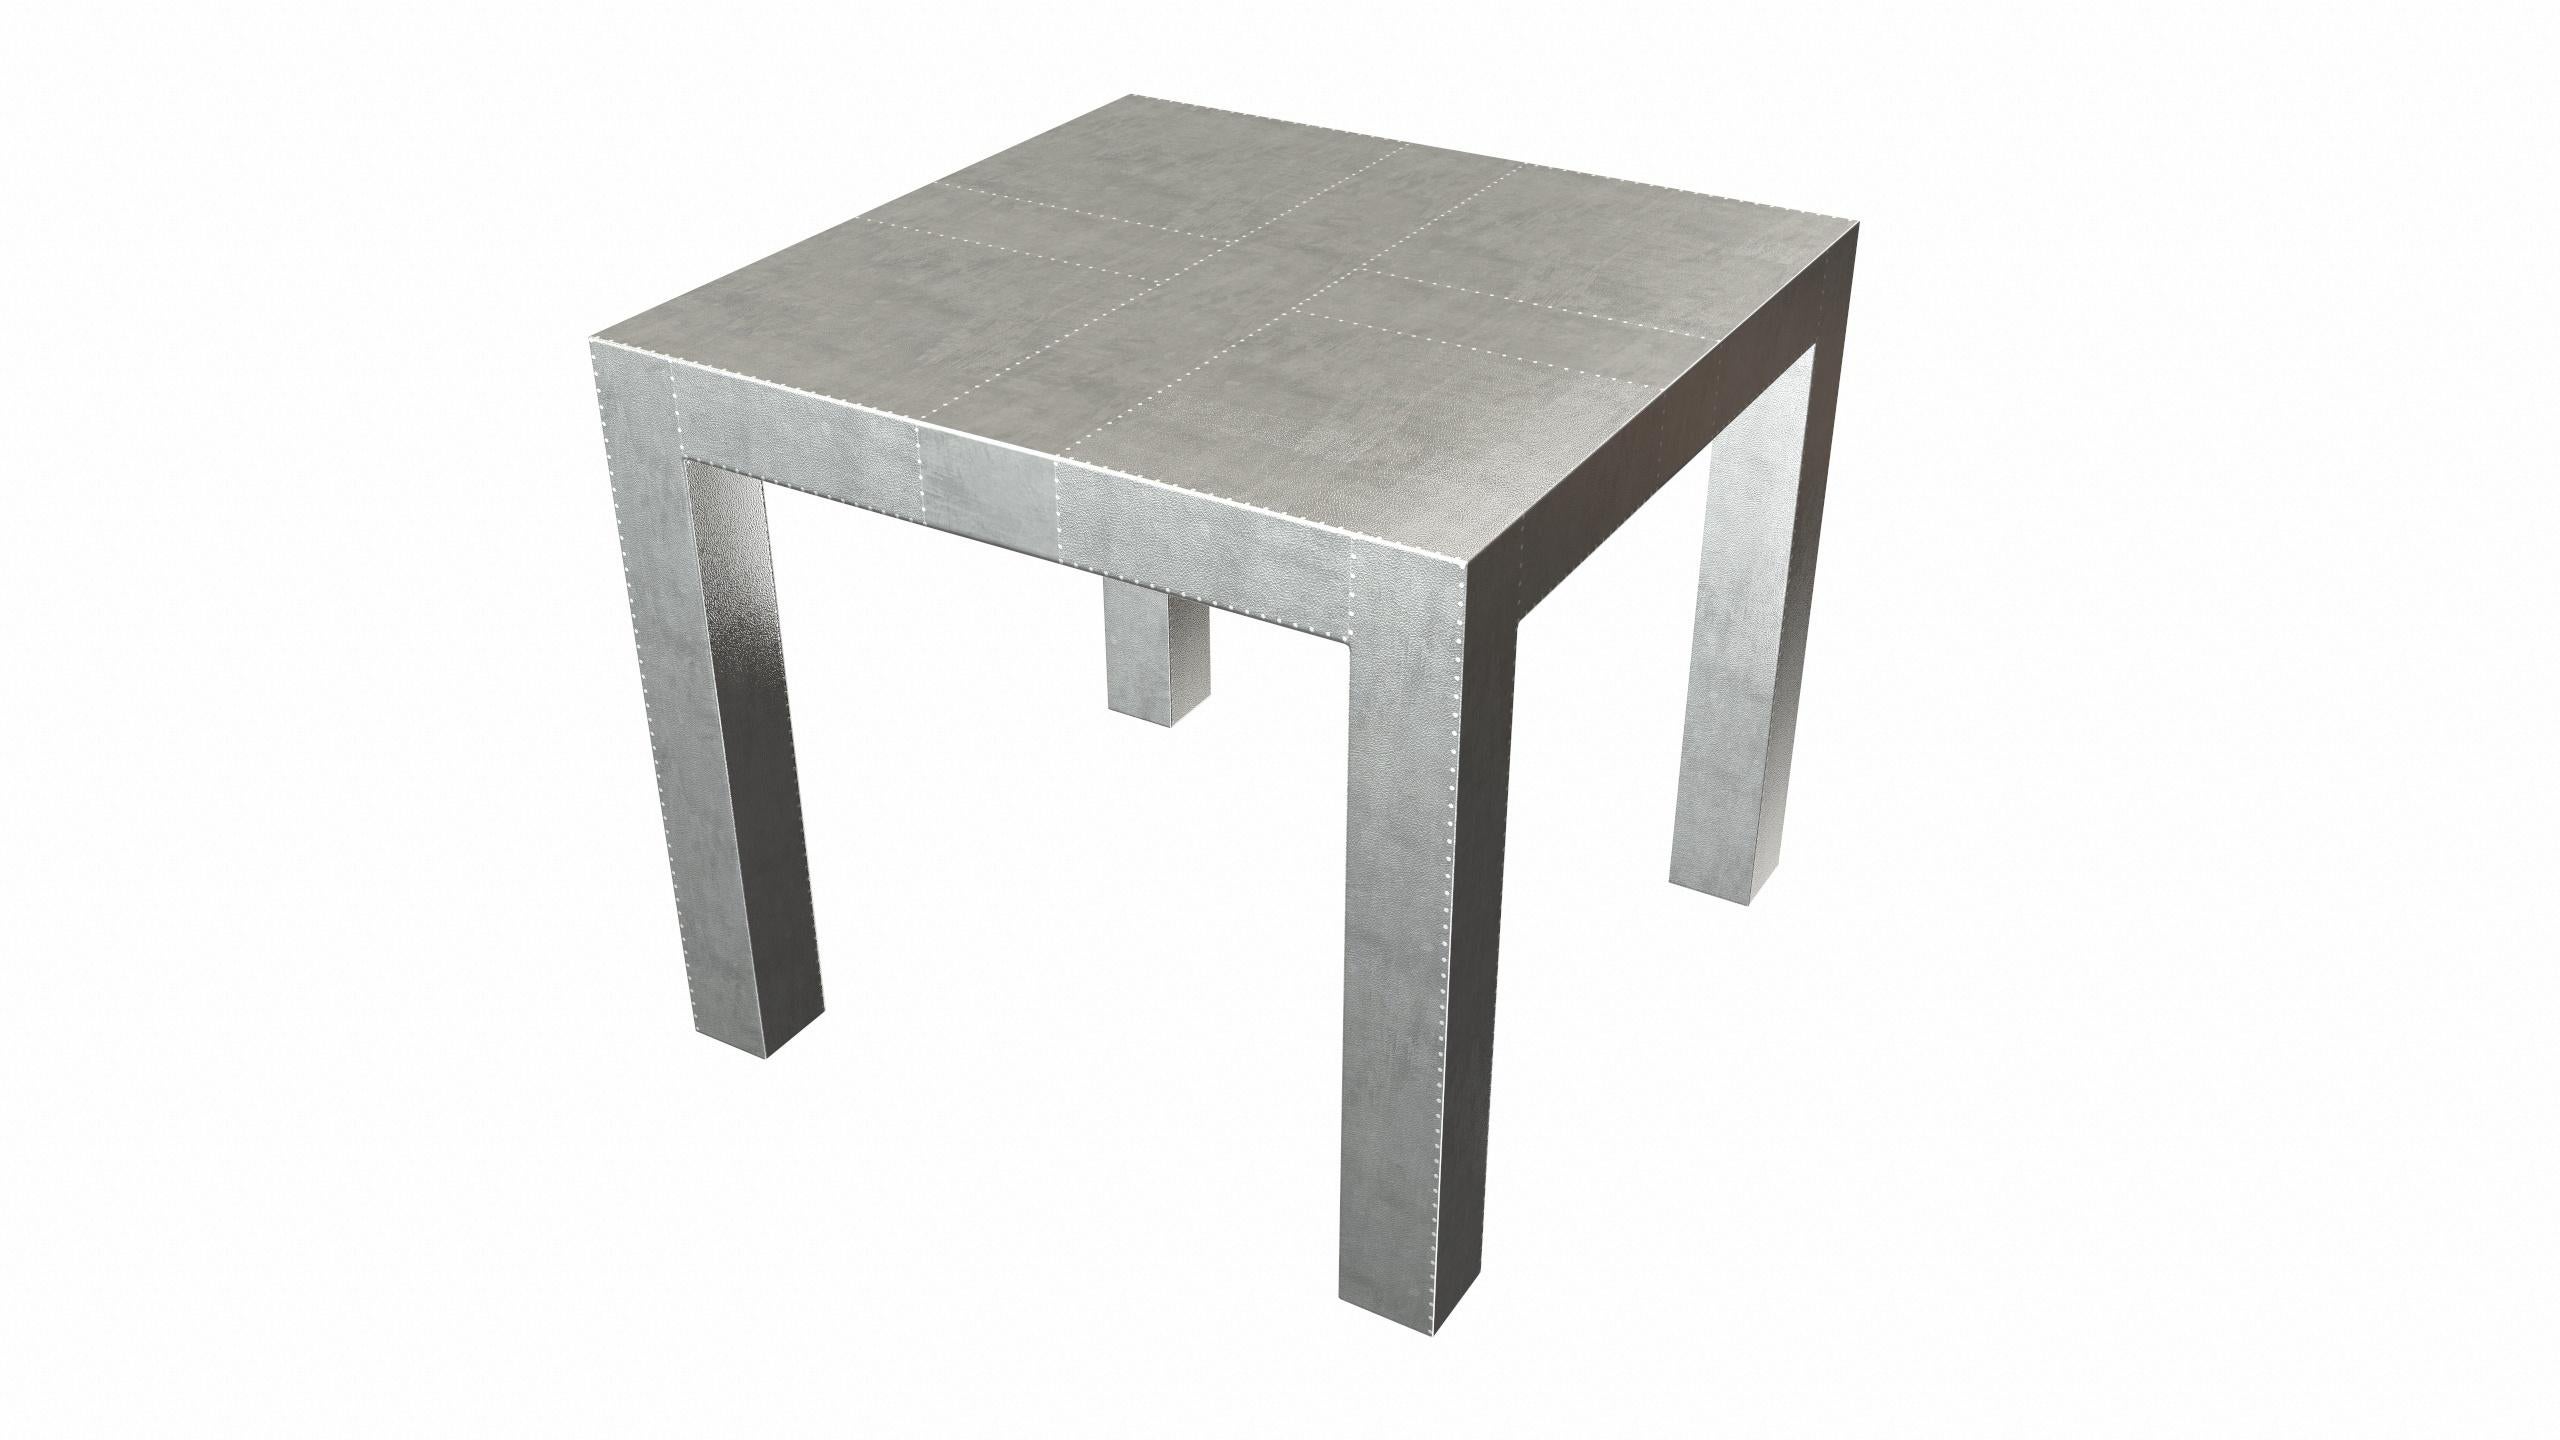 Wood Art Deco Square Drink Center Tables Fine Hammered White Bronze by Alison Spear For Sale